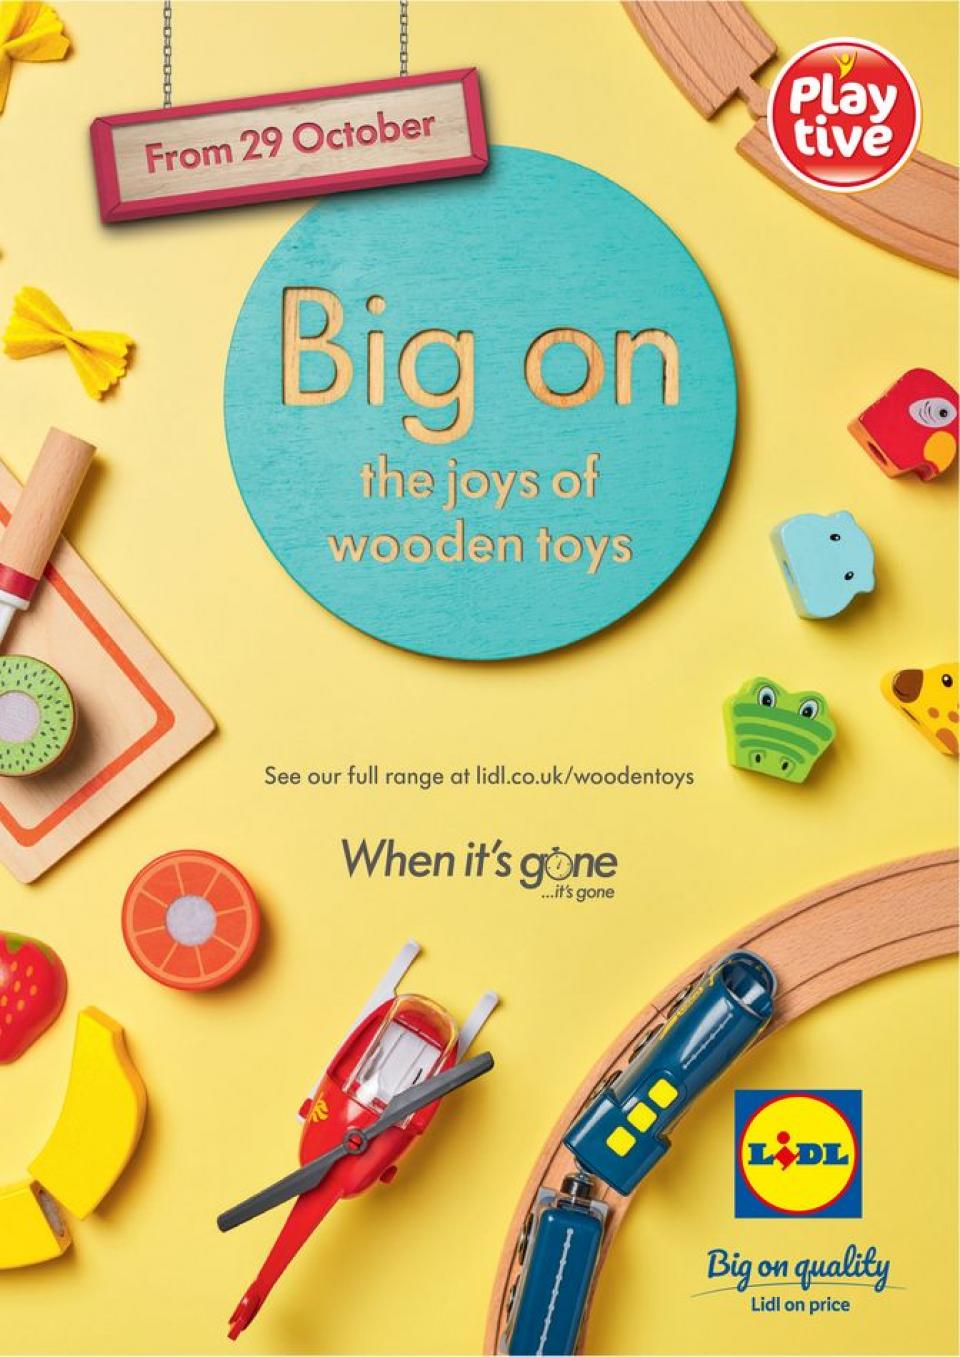 lidl offers wooden toys 22 october 2020